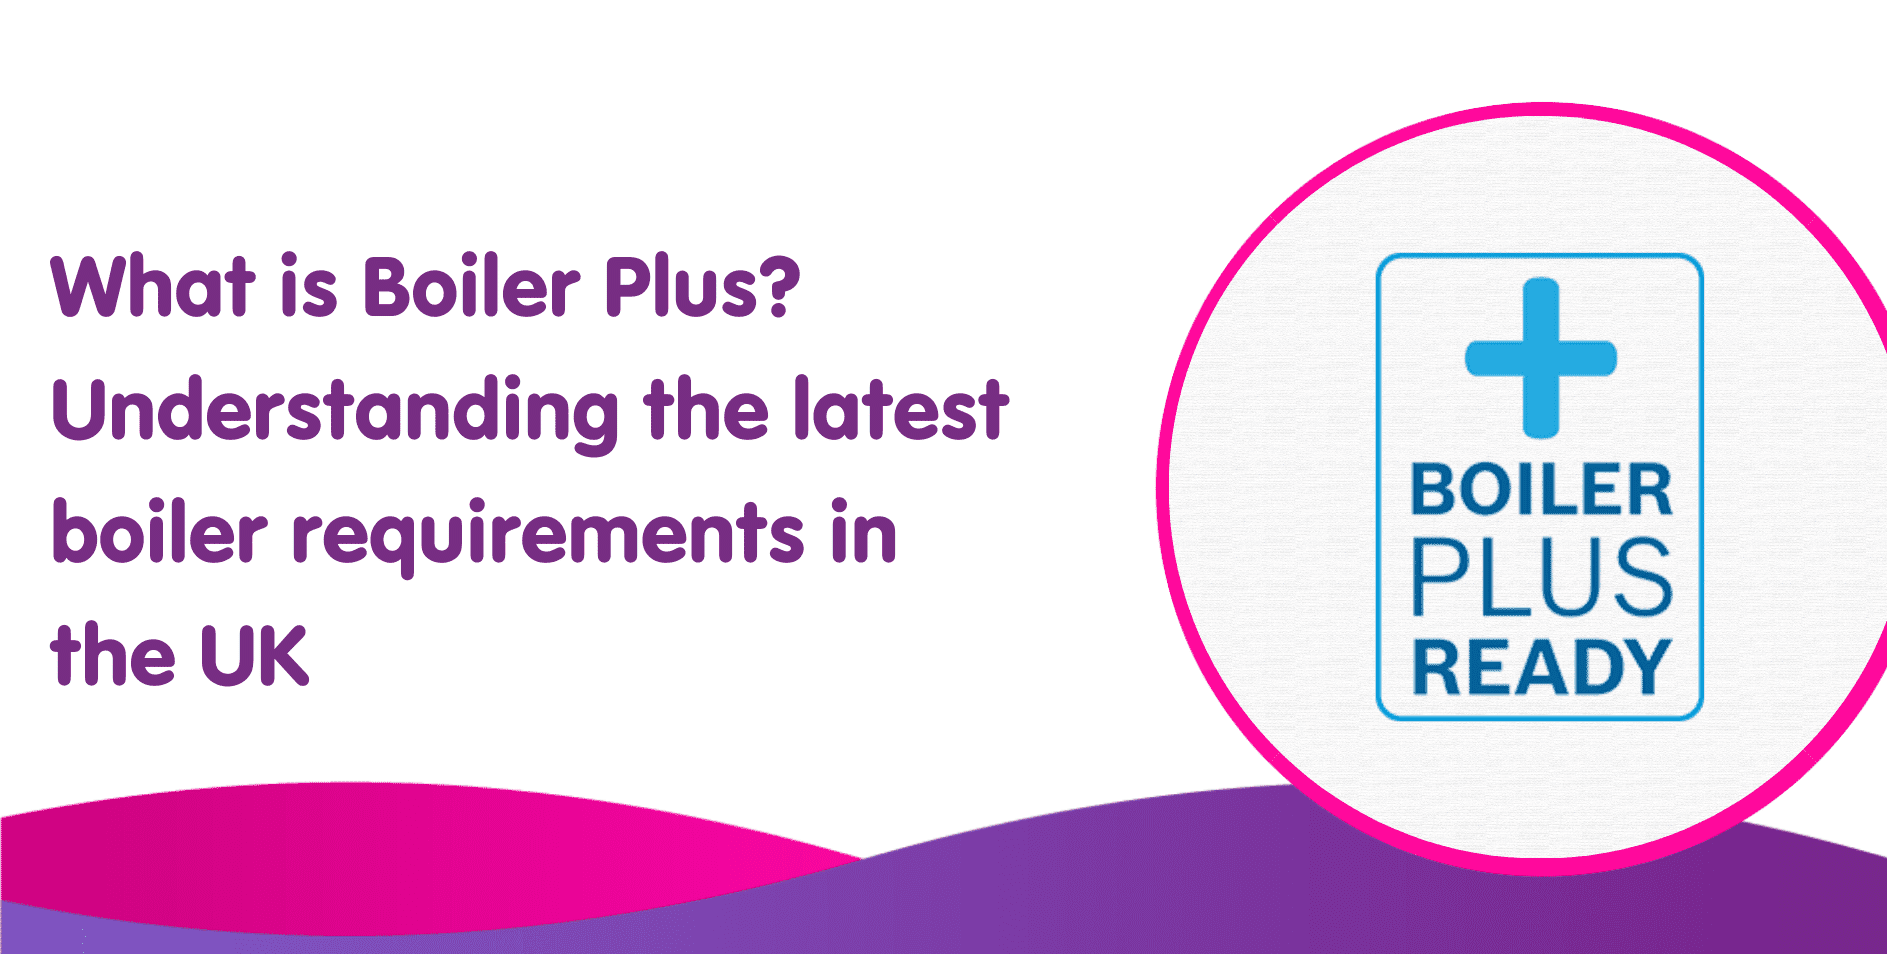 What is Boiler Plus? Understanding the latest boiler requirements in the UK